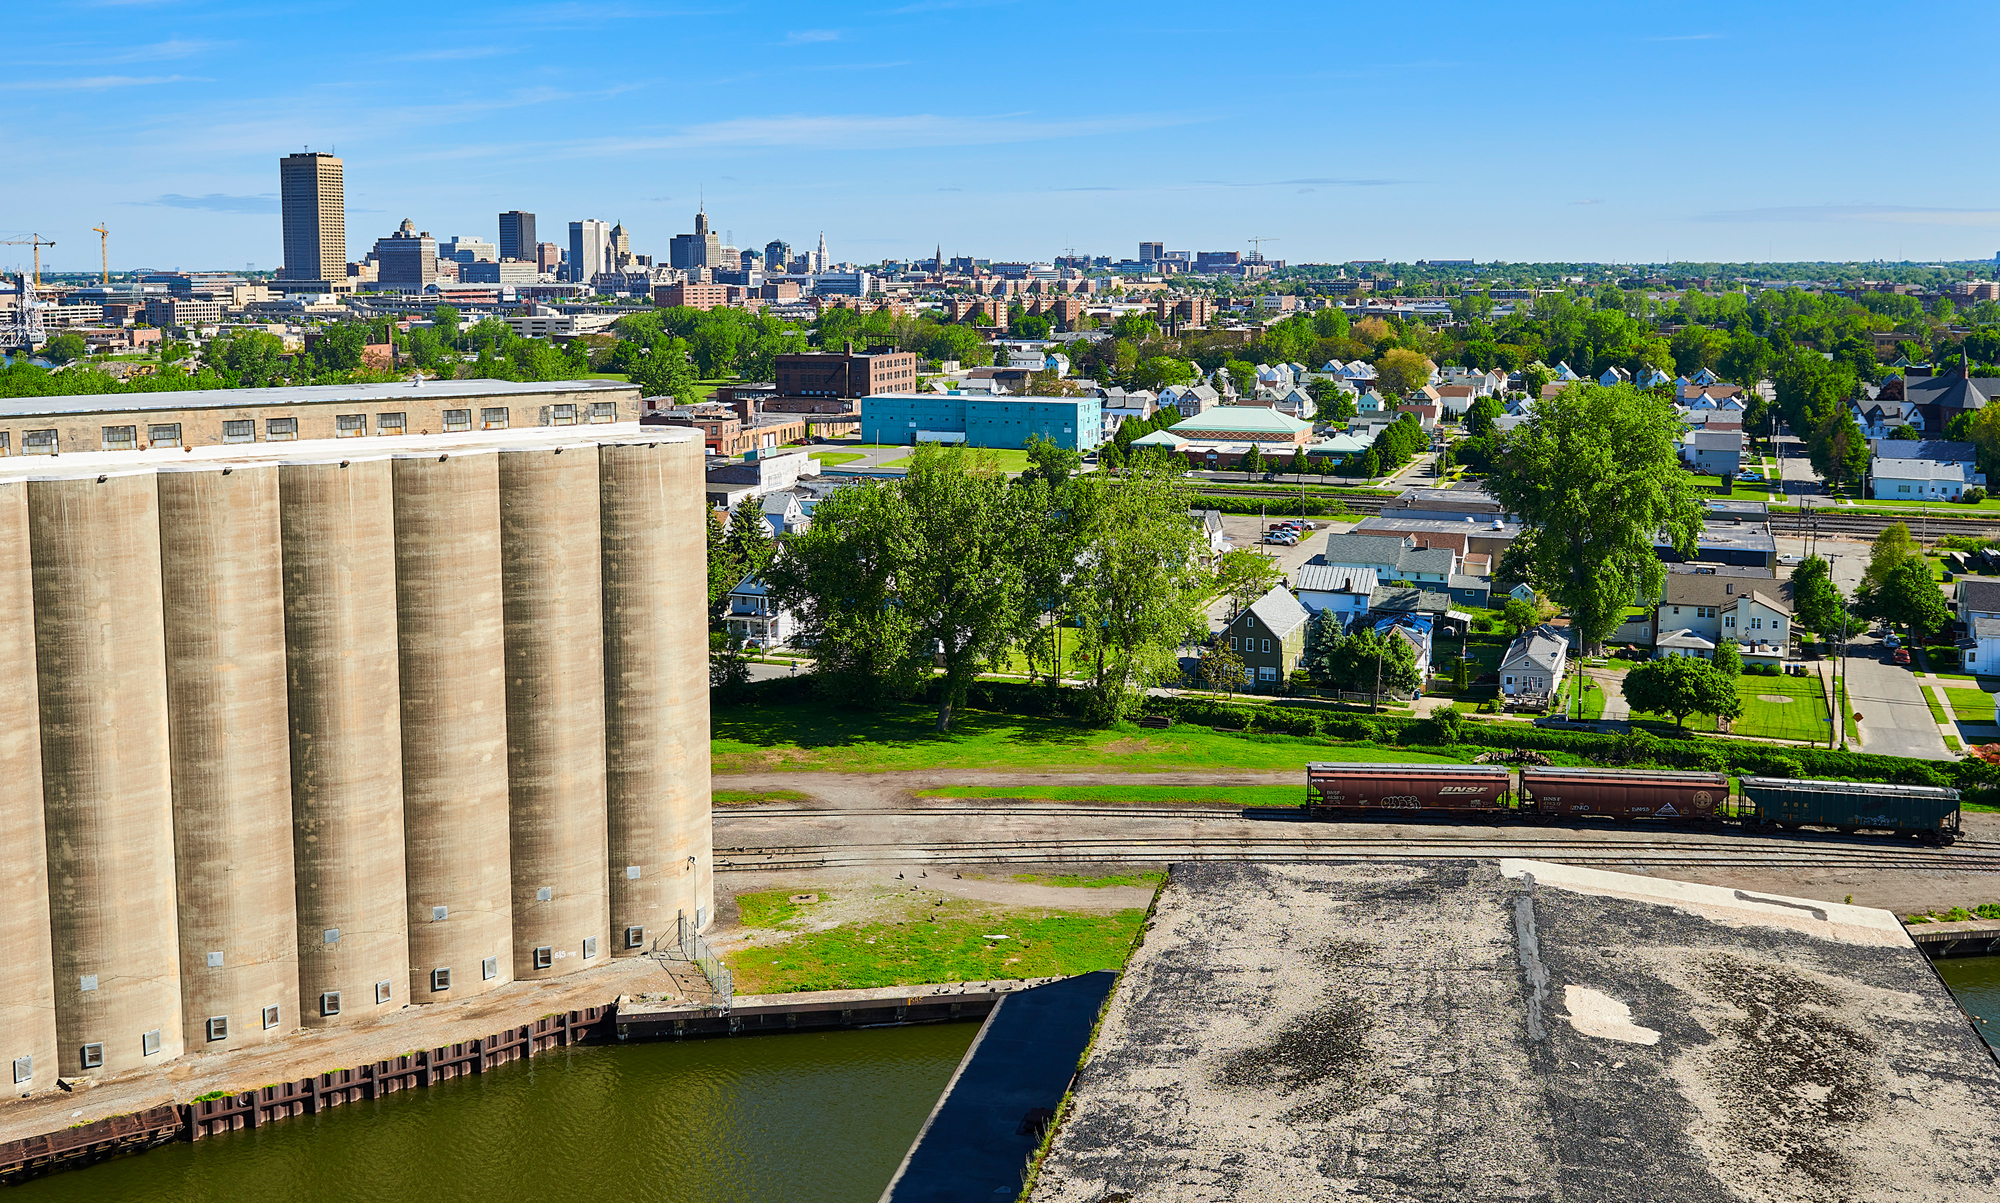 A view from the top of one silo and you can see Buffalo in the background